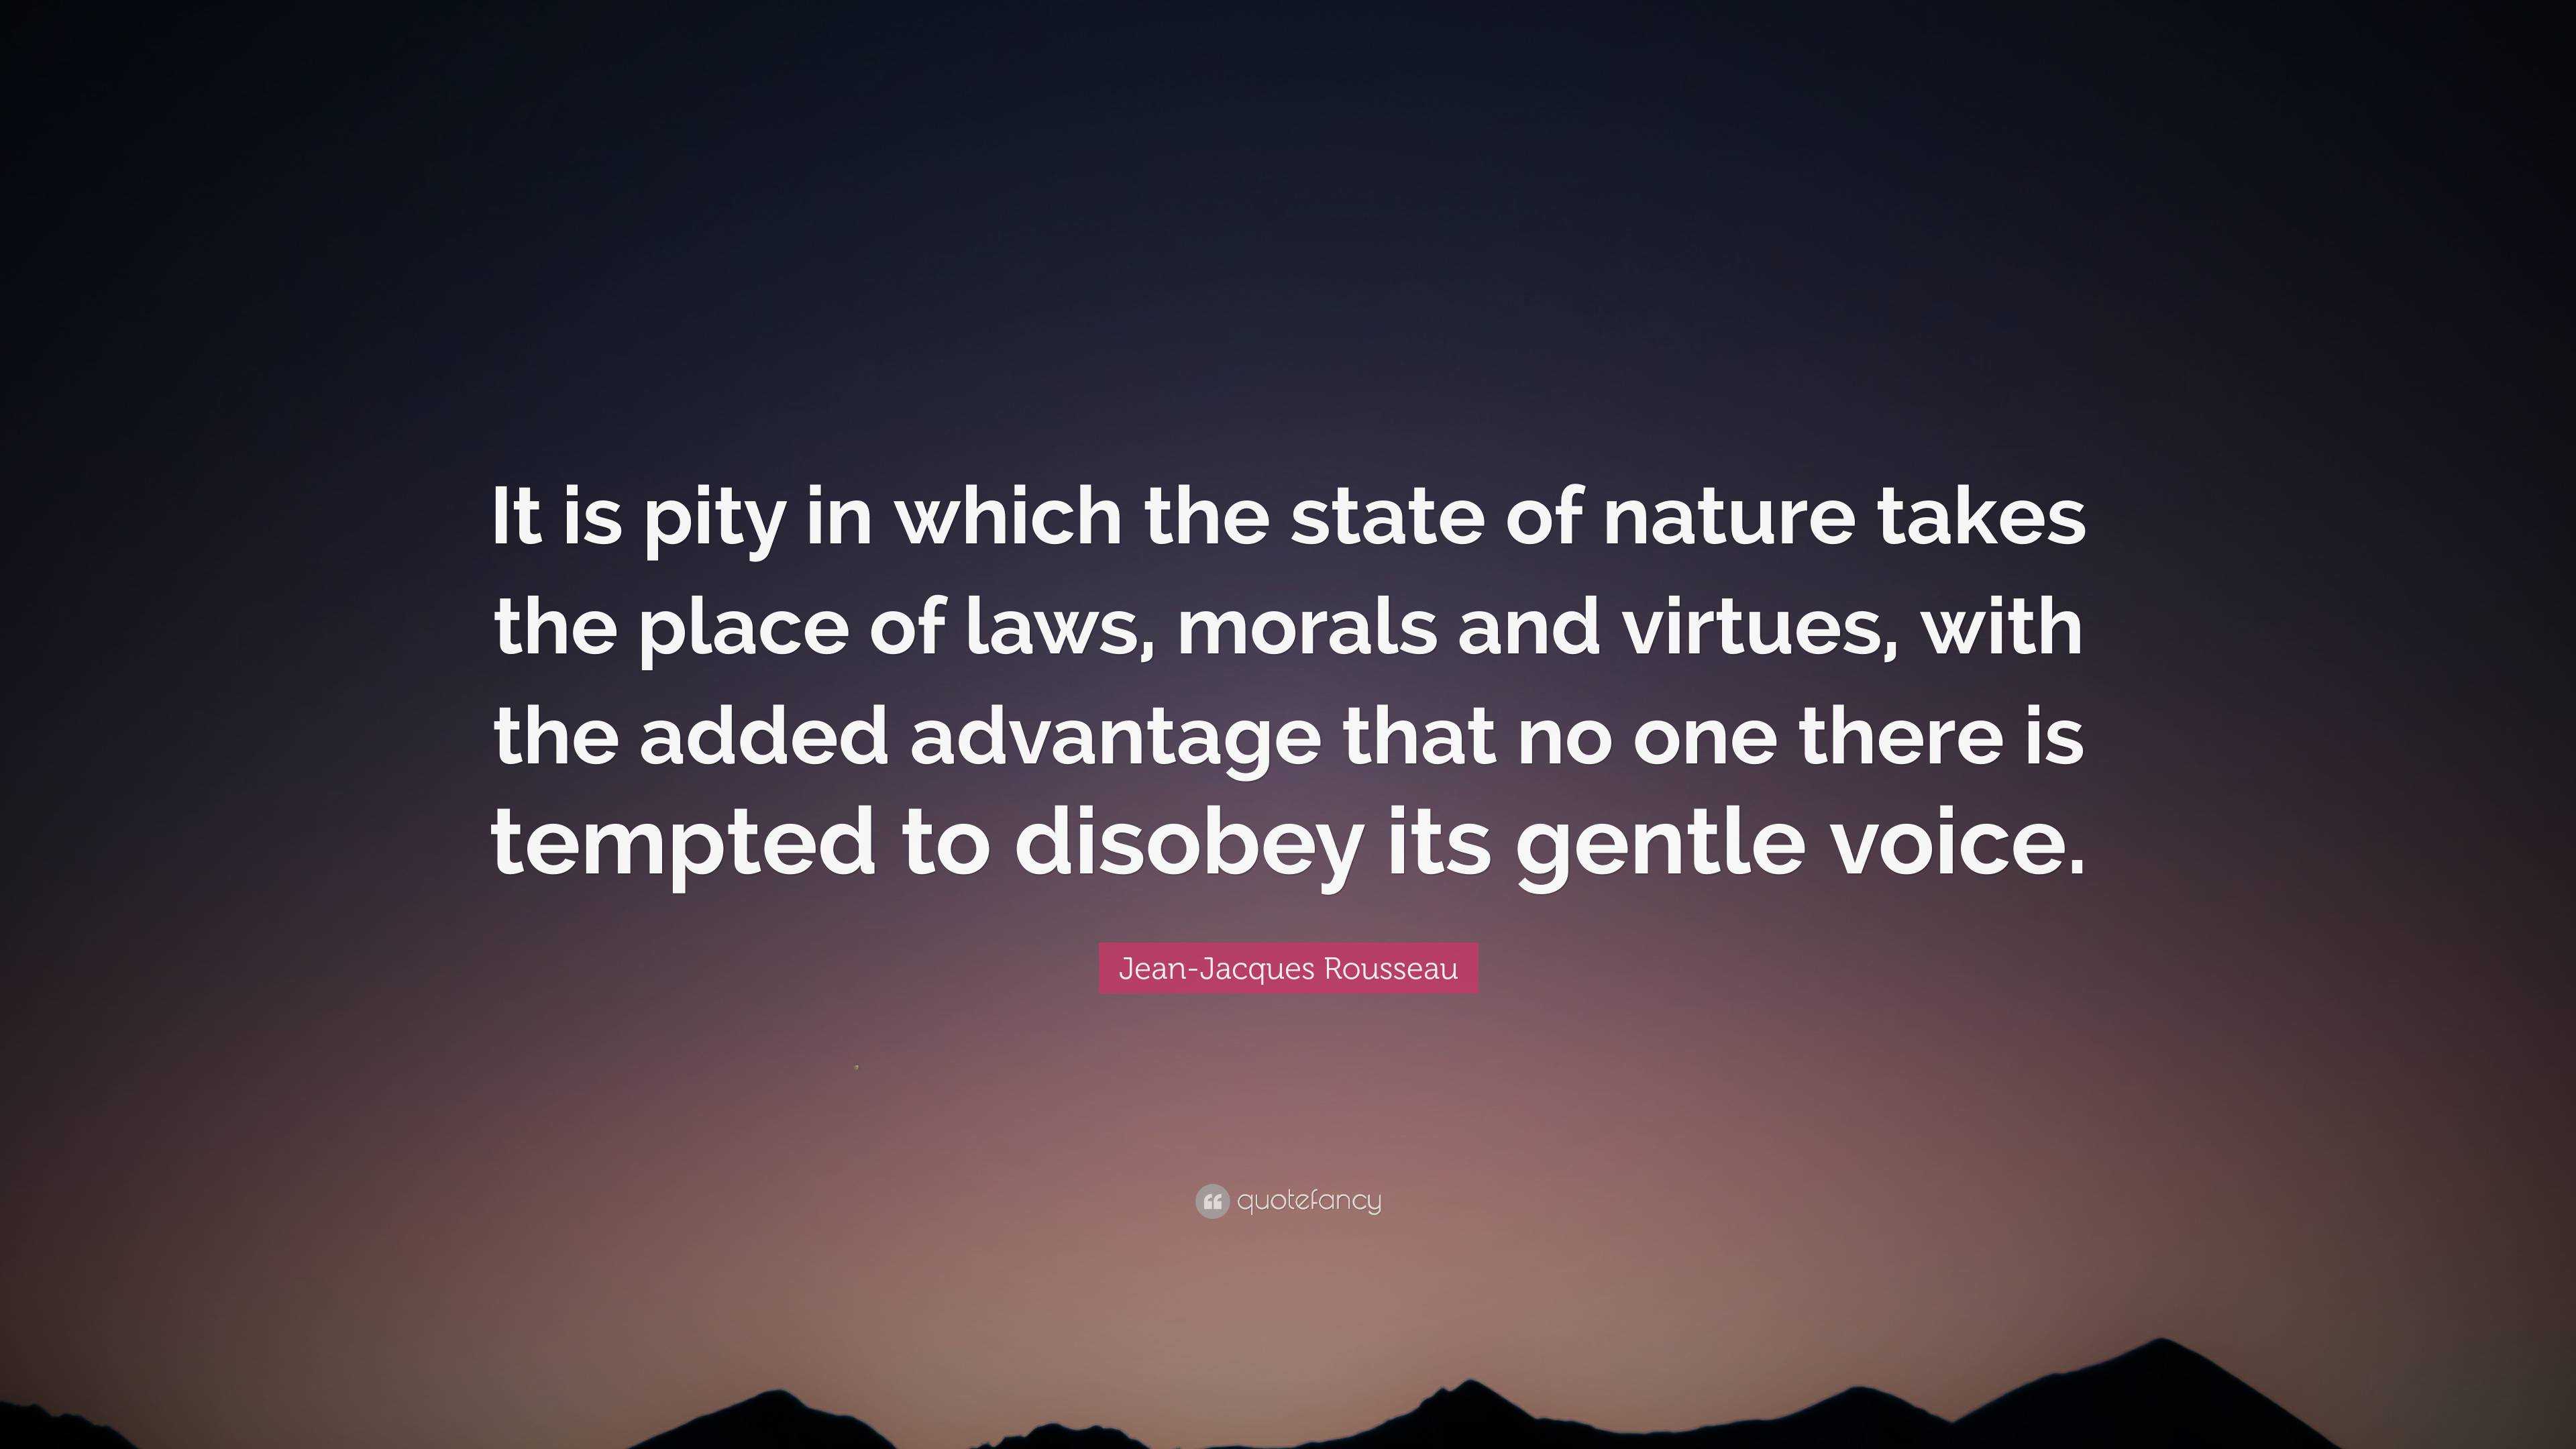 vej rækkevidde klodset Jean-Jacques Rousseau Quote: “It is pity in which the state of nature takes  the place of laws, morals and virtues, with the added advantage that no  on...”